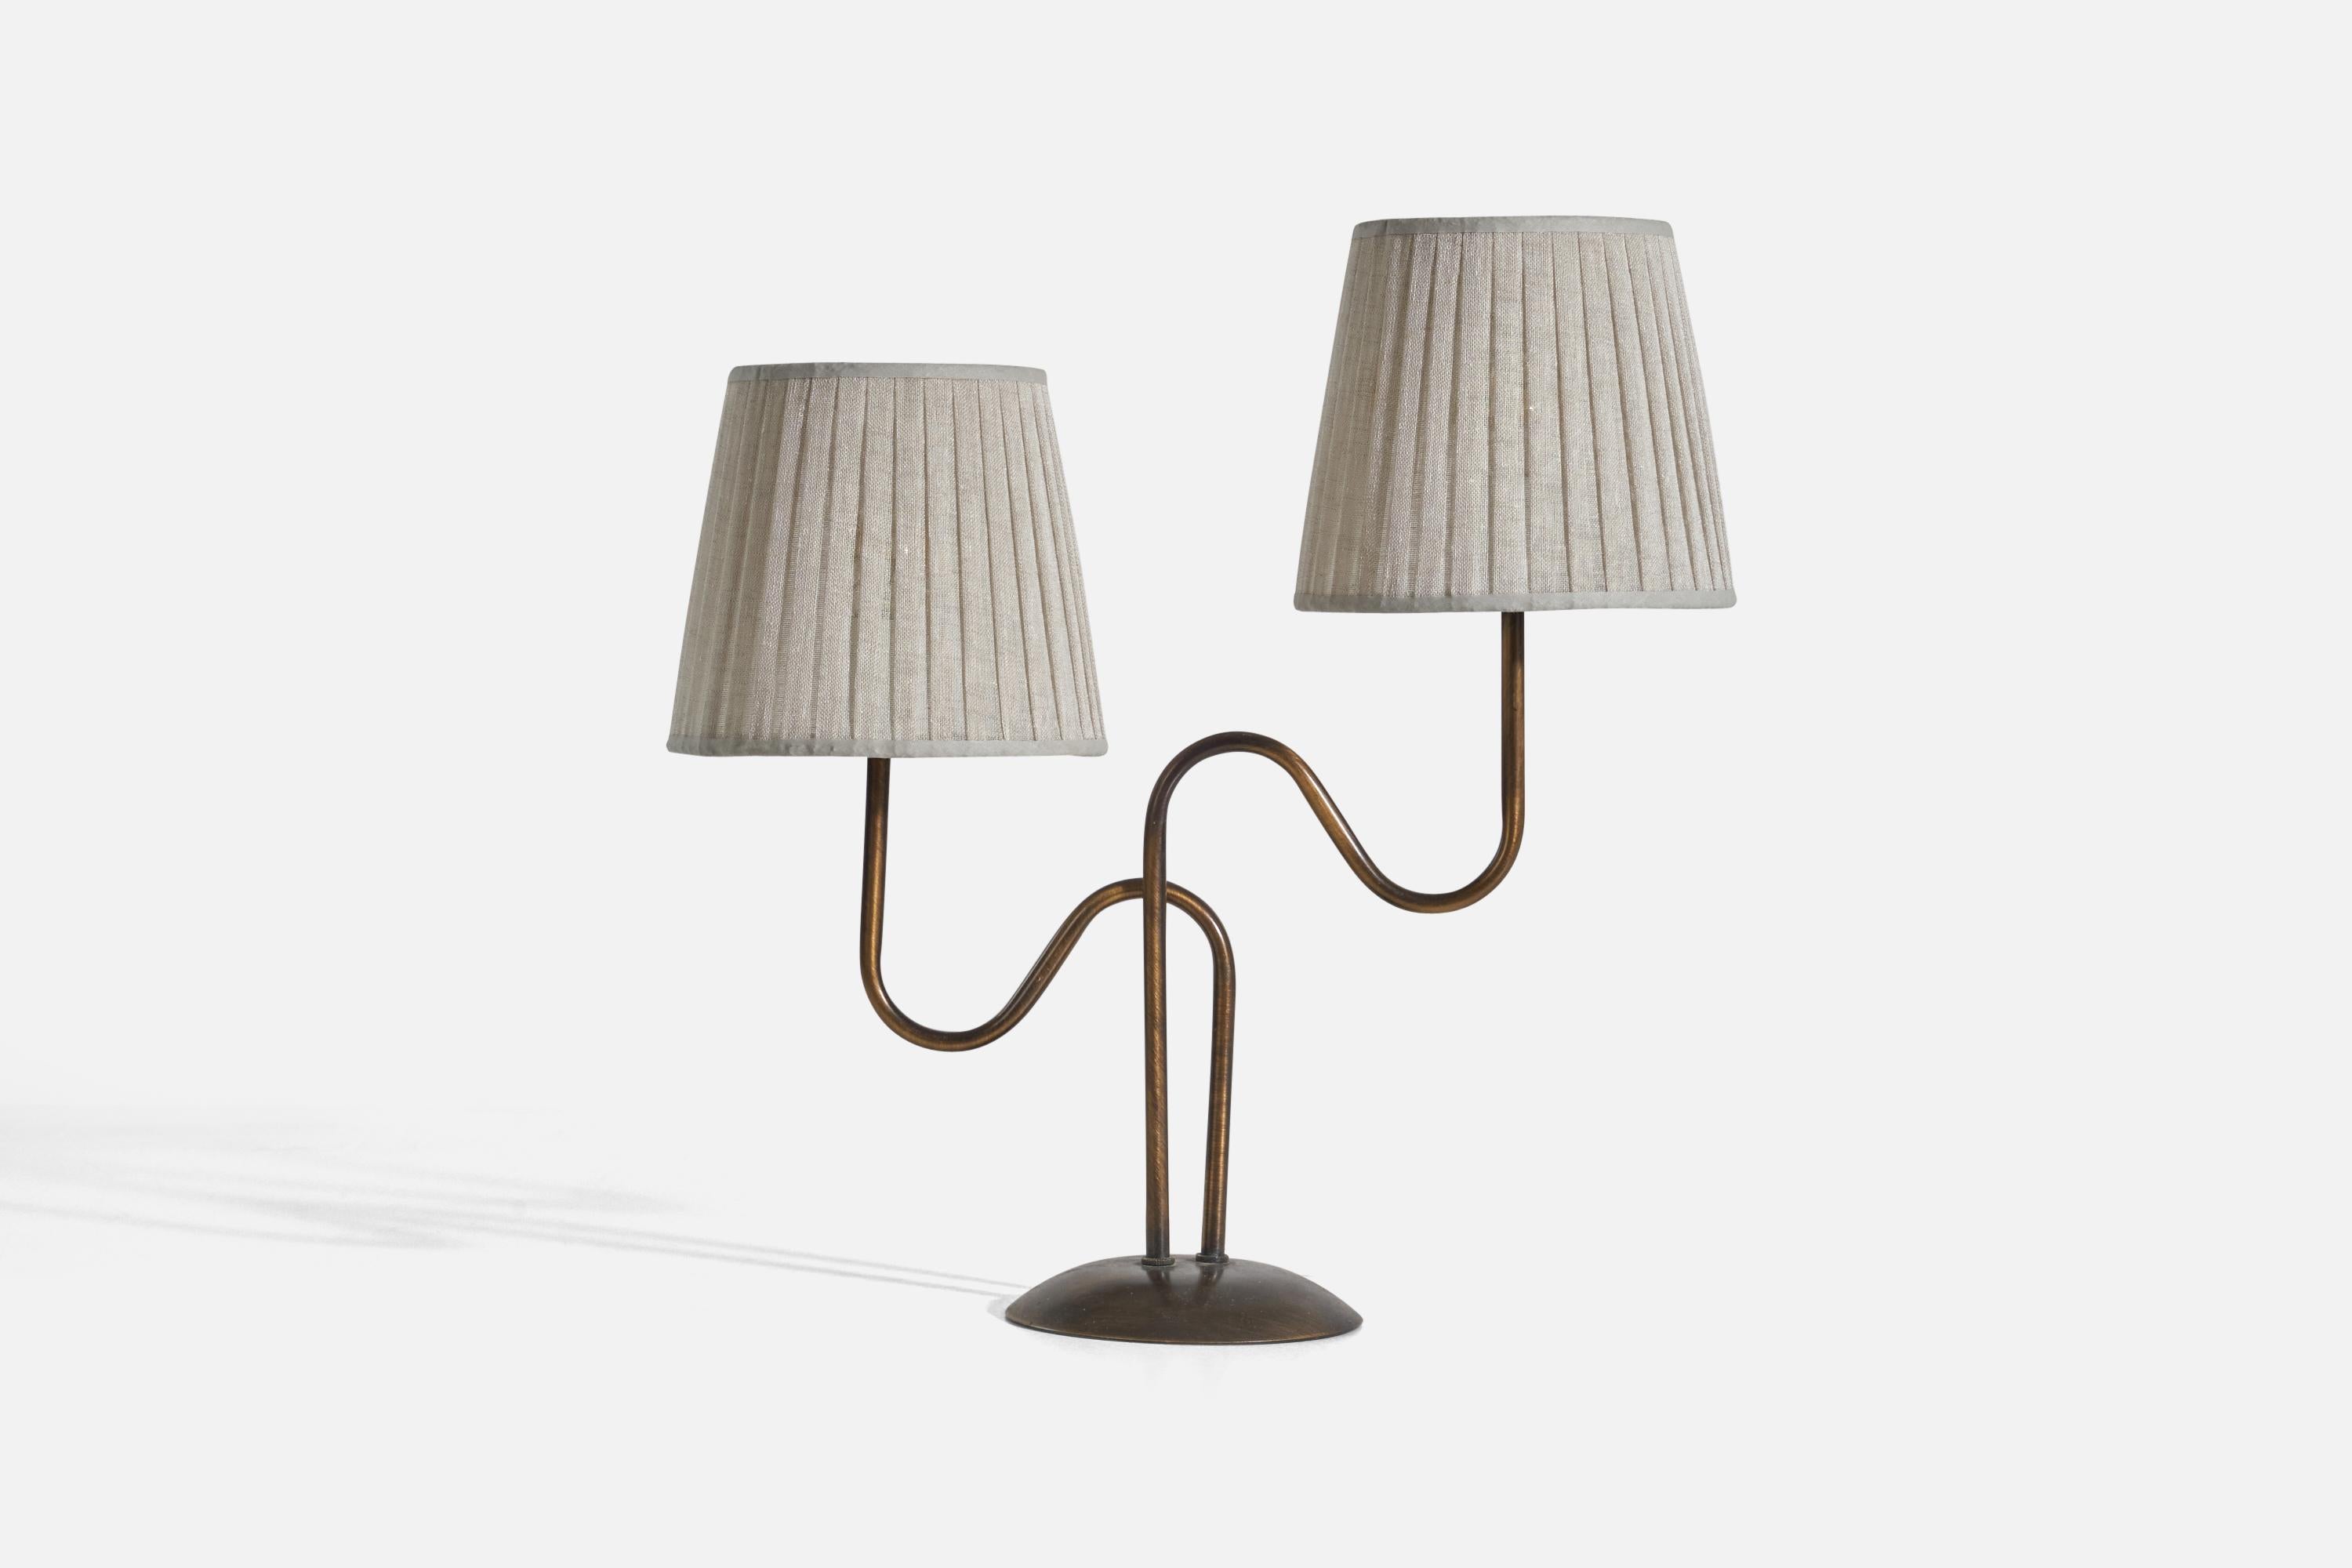 A brass and fabric, 2-light table lamp designed and produced in Sweden, c. 1970s-1980s.

Sold with Lampshades. Dimensions stated are of table lamp with Lampshades.

Socket takes E-14 bulb.

There is no maximum wattage stated on the fixture.